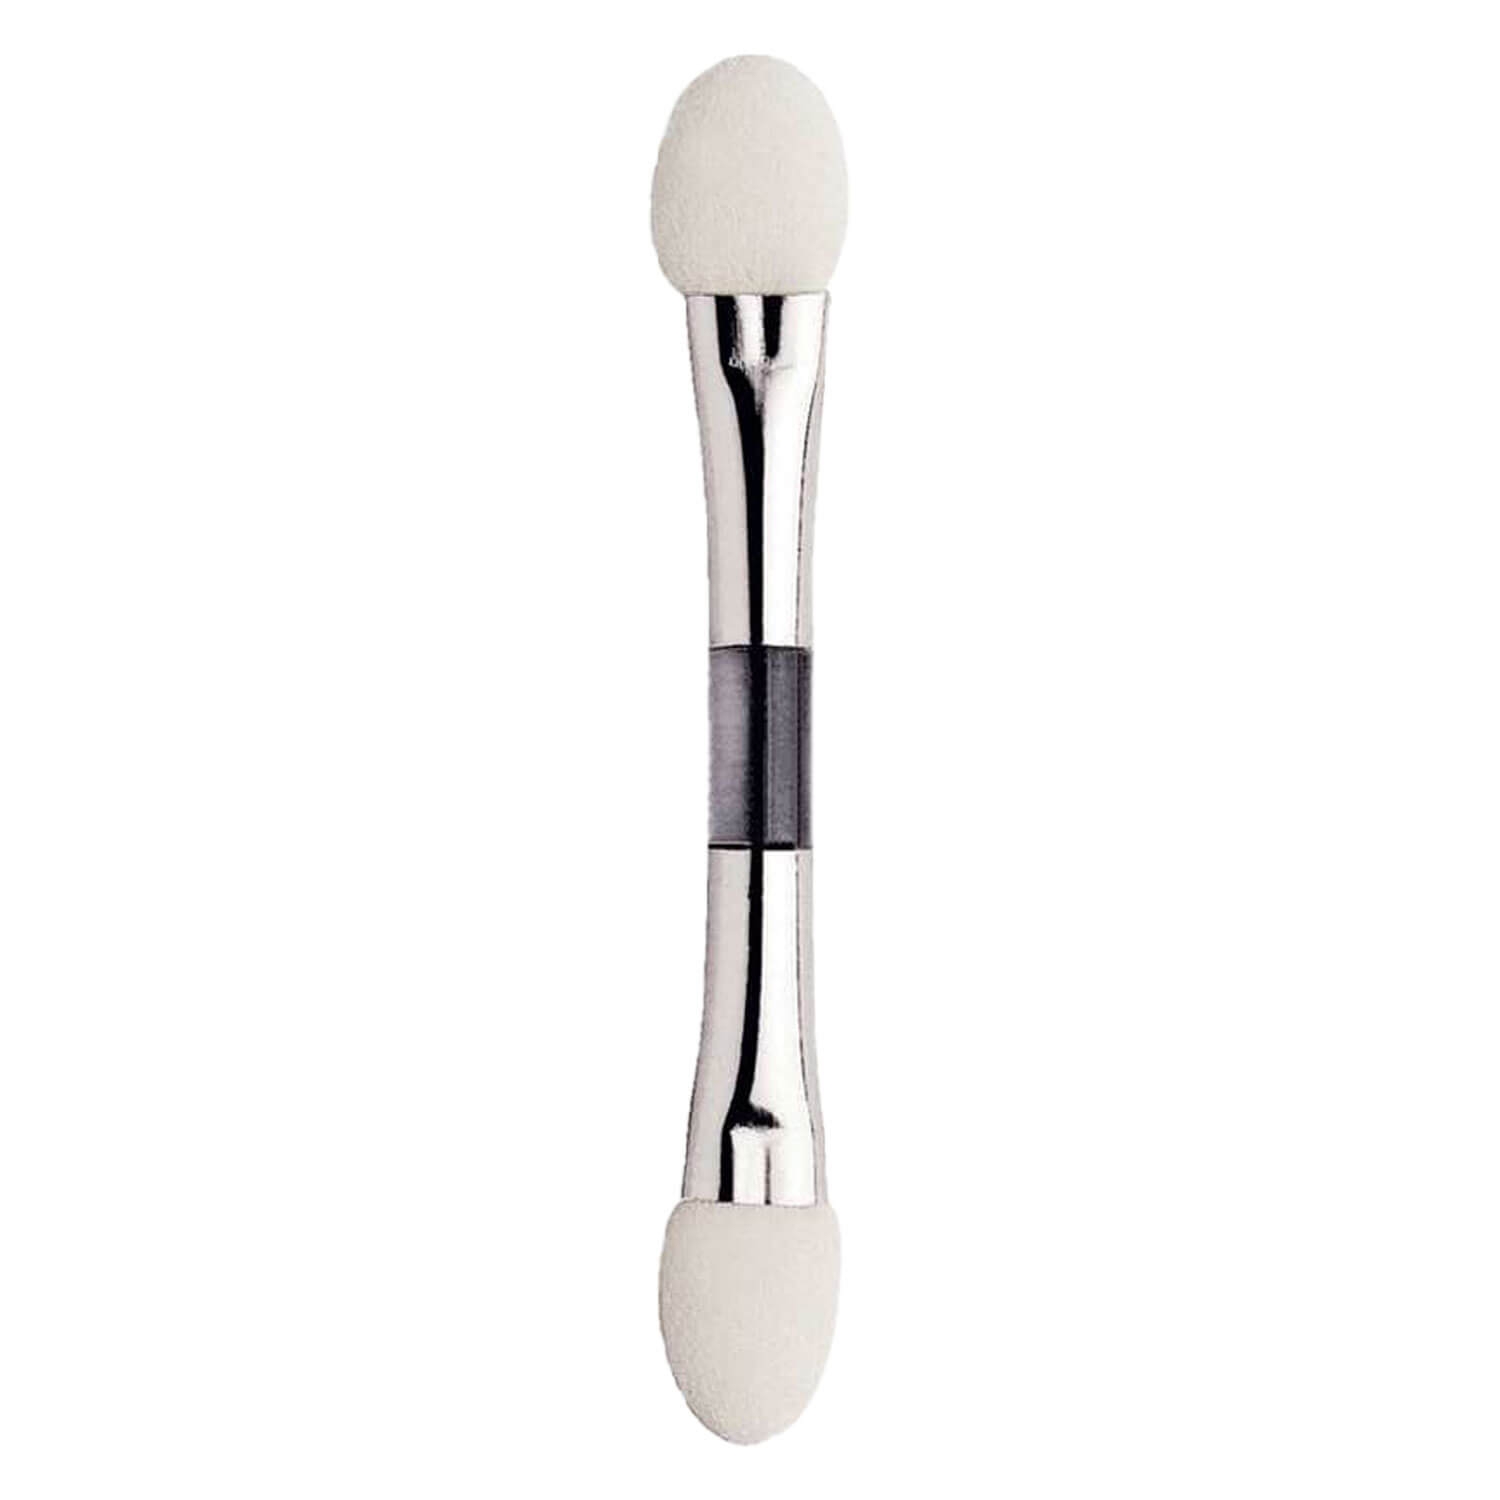 Product image from Artdeco Tools - Eyeshadow Duo Applicator for Quattro Box Transparent